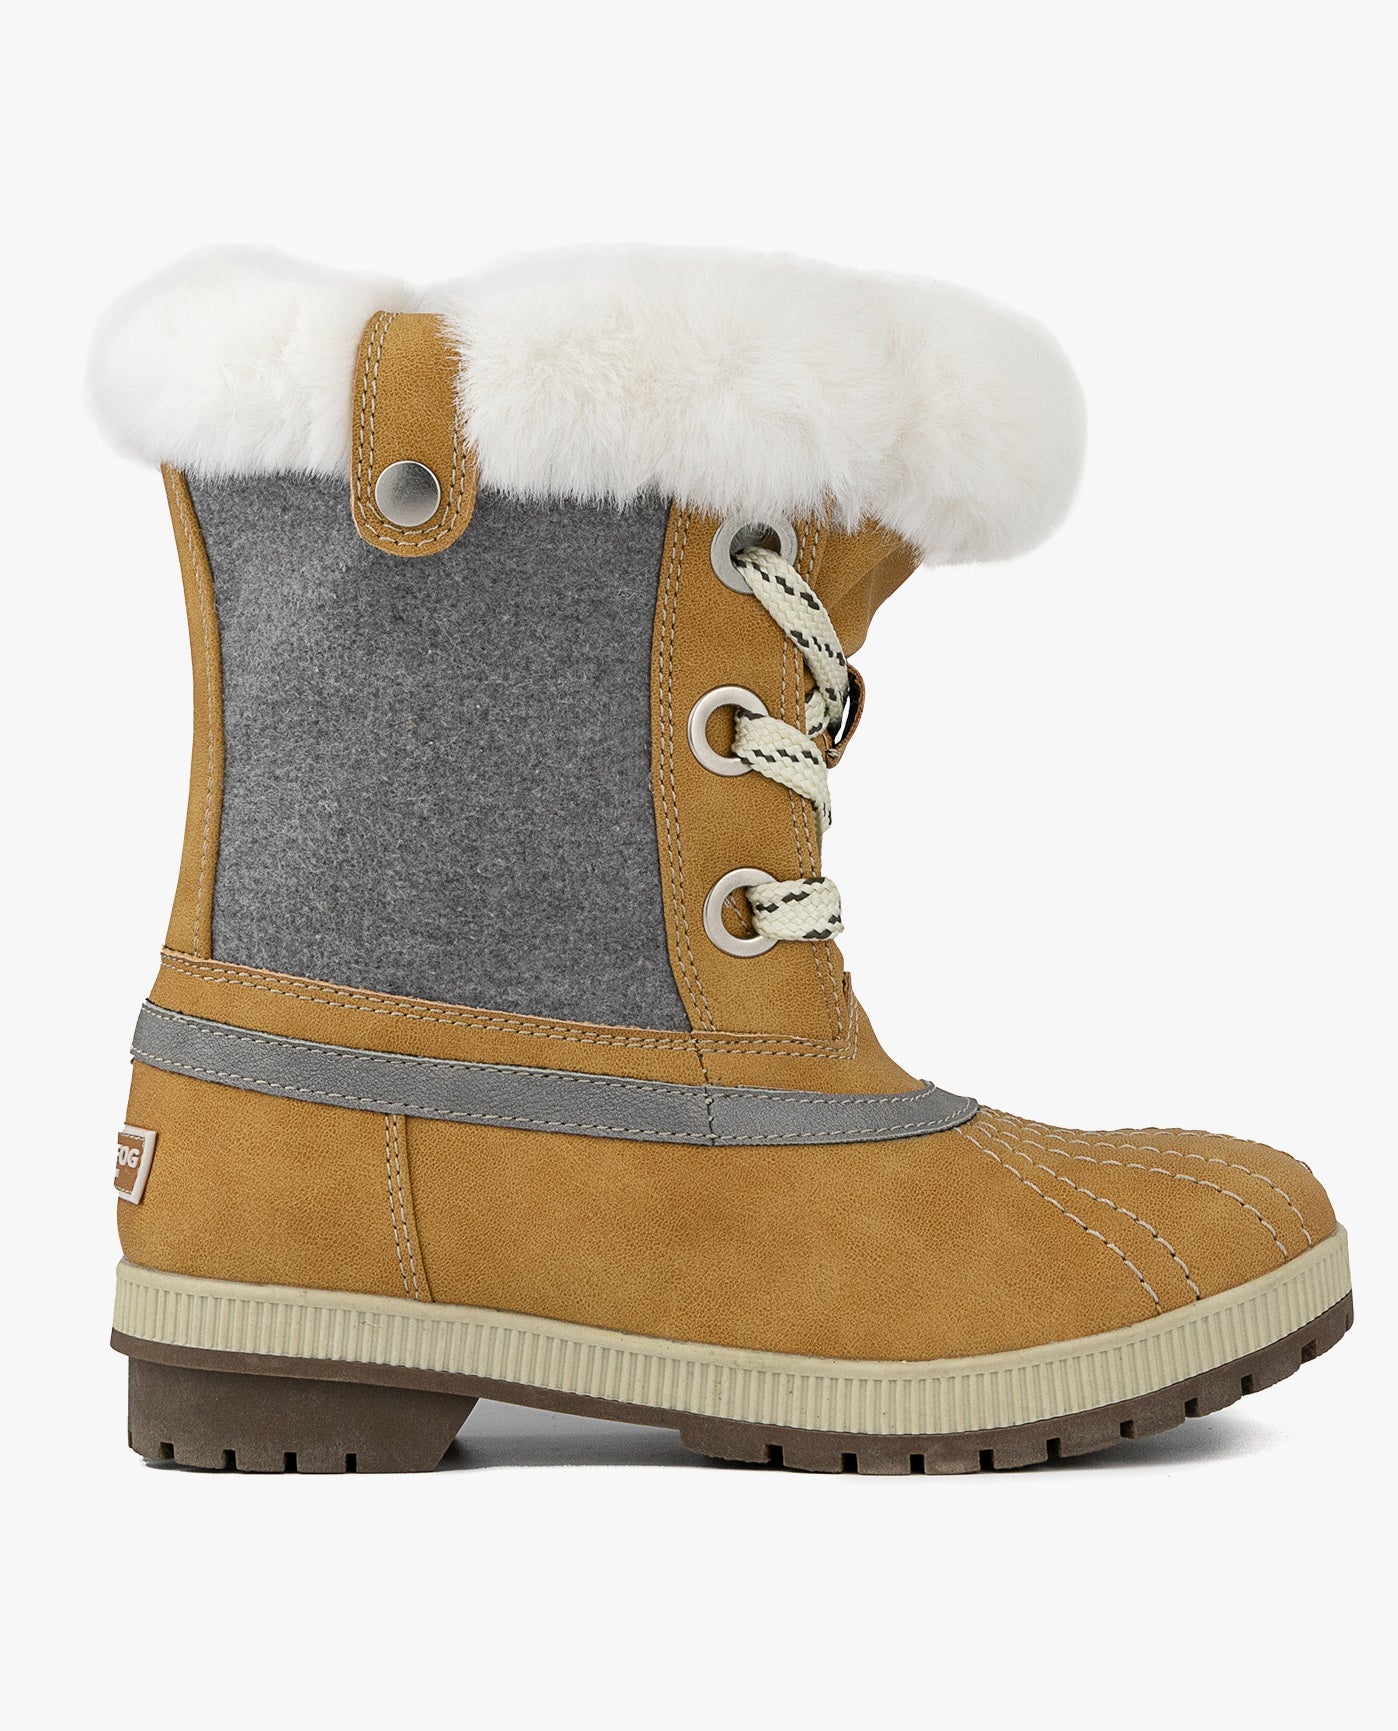 OTHER SIDE VIEW  OF WOMENS MILLY WINTER BOOT | ESO_HONEY GREY_251